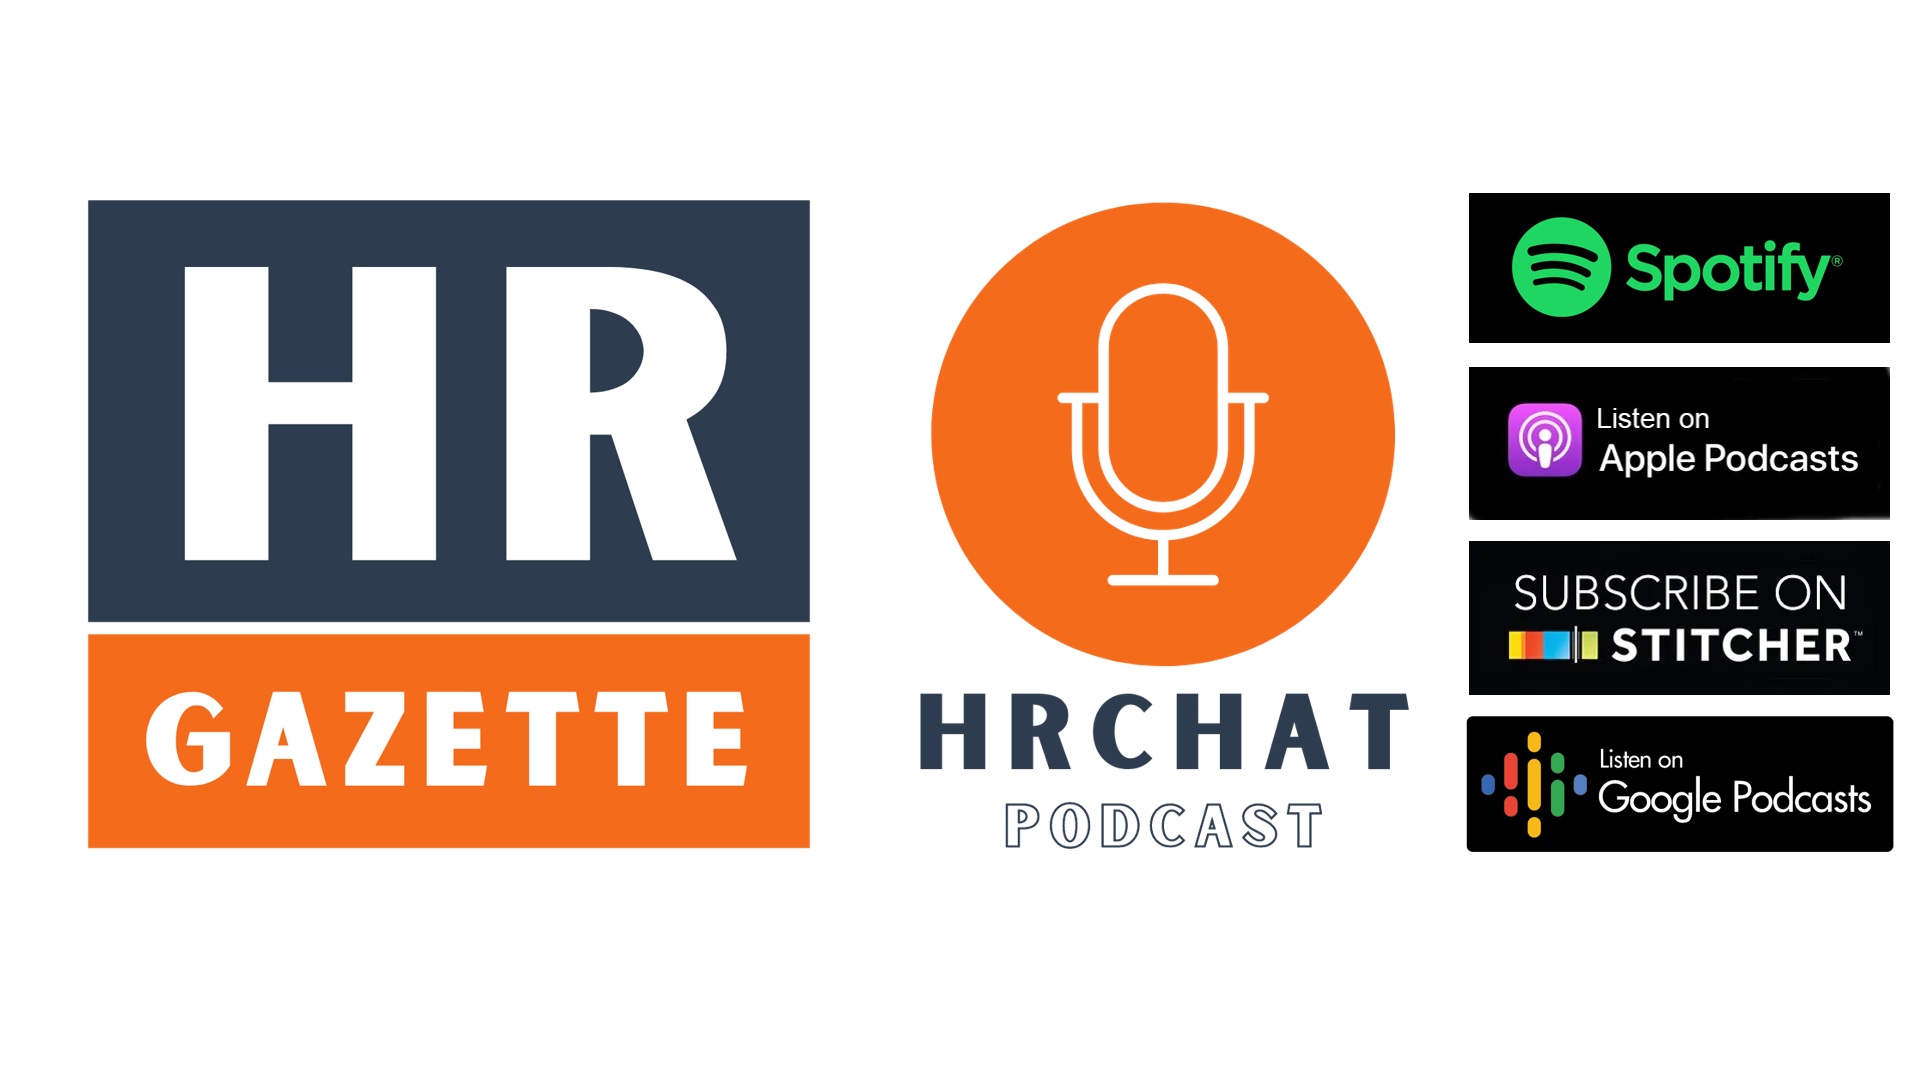 HR Gazette and HRchat Podcast